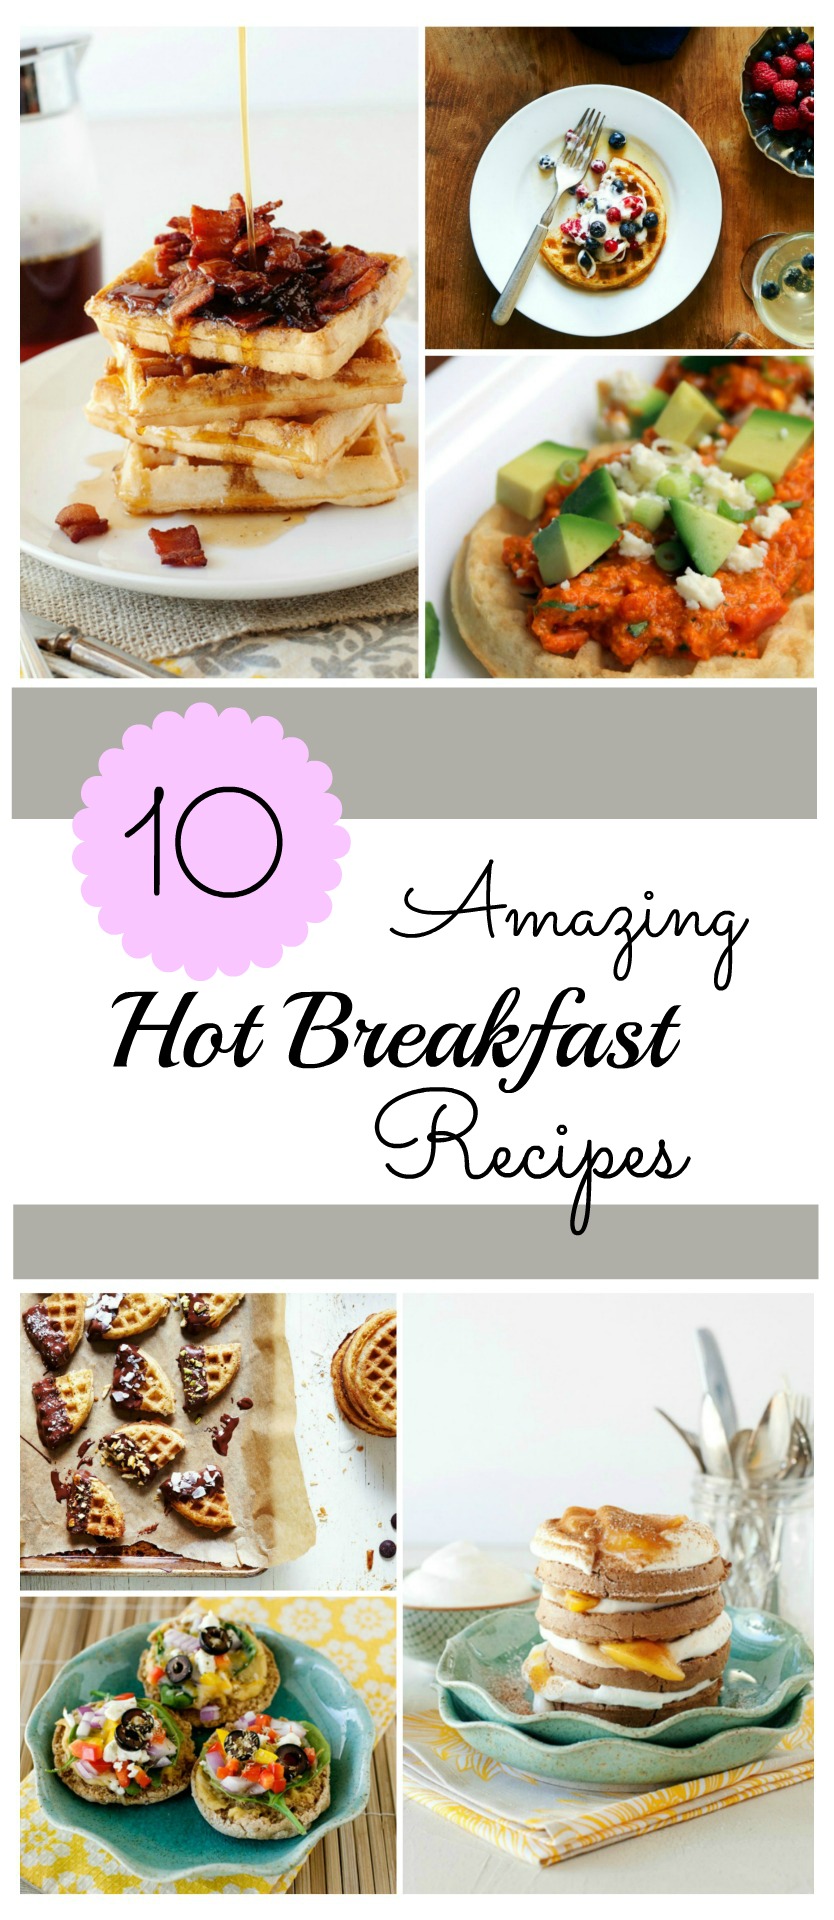 Looking for some yummy breakfast ideas? Check out these 10 Amazing Hot Breakfast Recipes and see why we are a big fan of Van's Frozen Waffles here! 